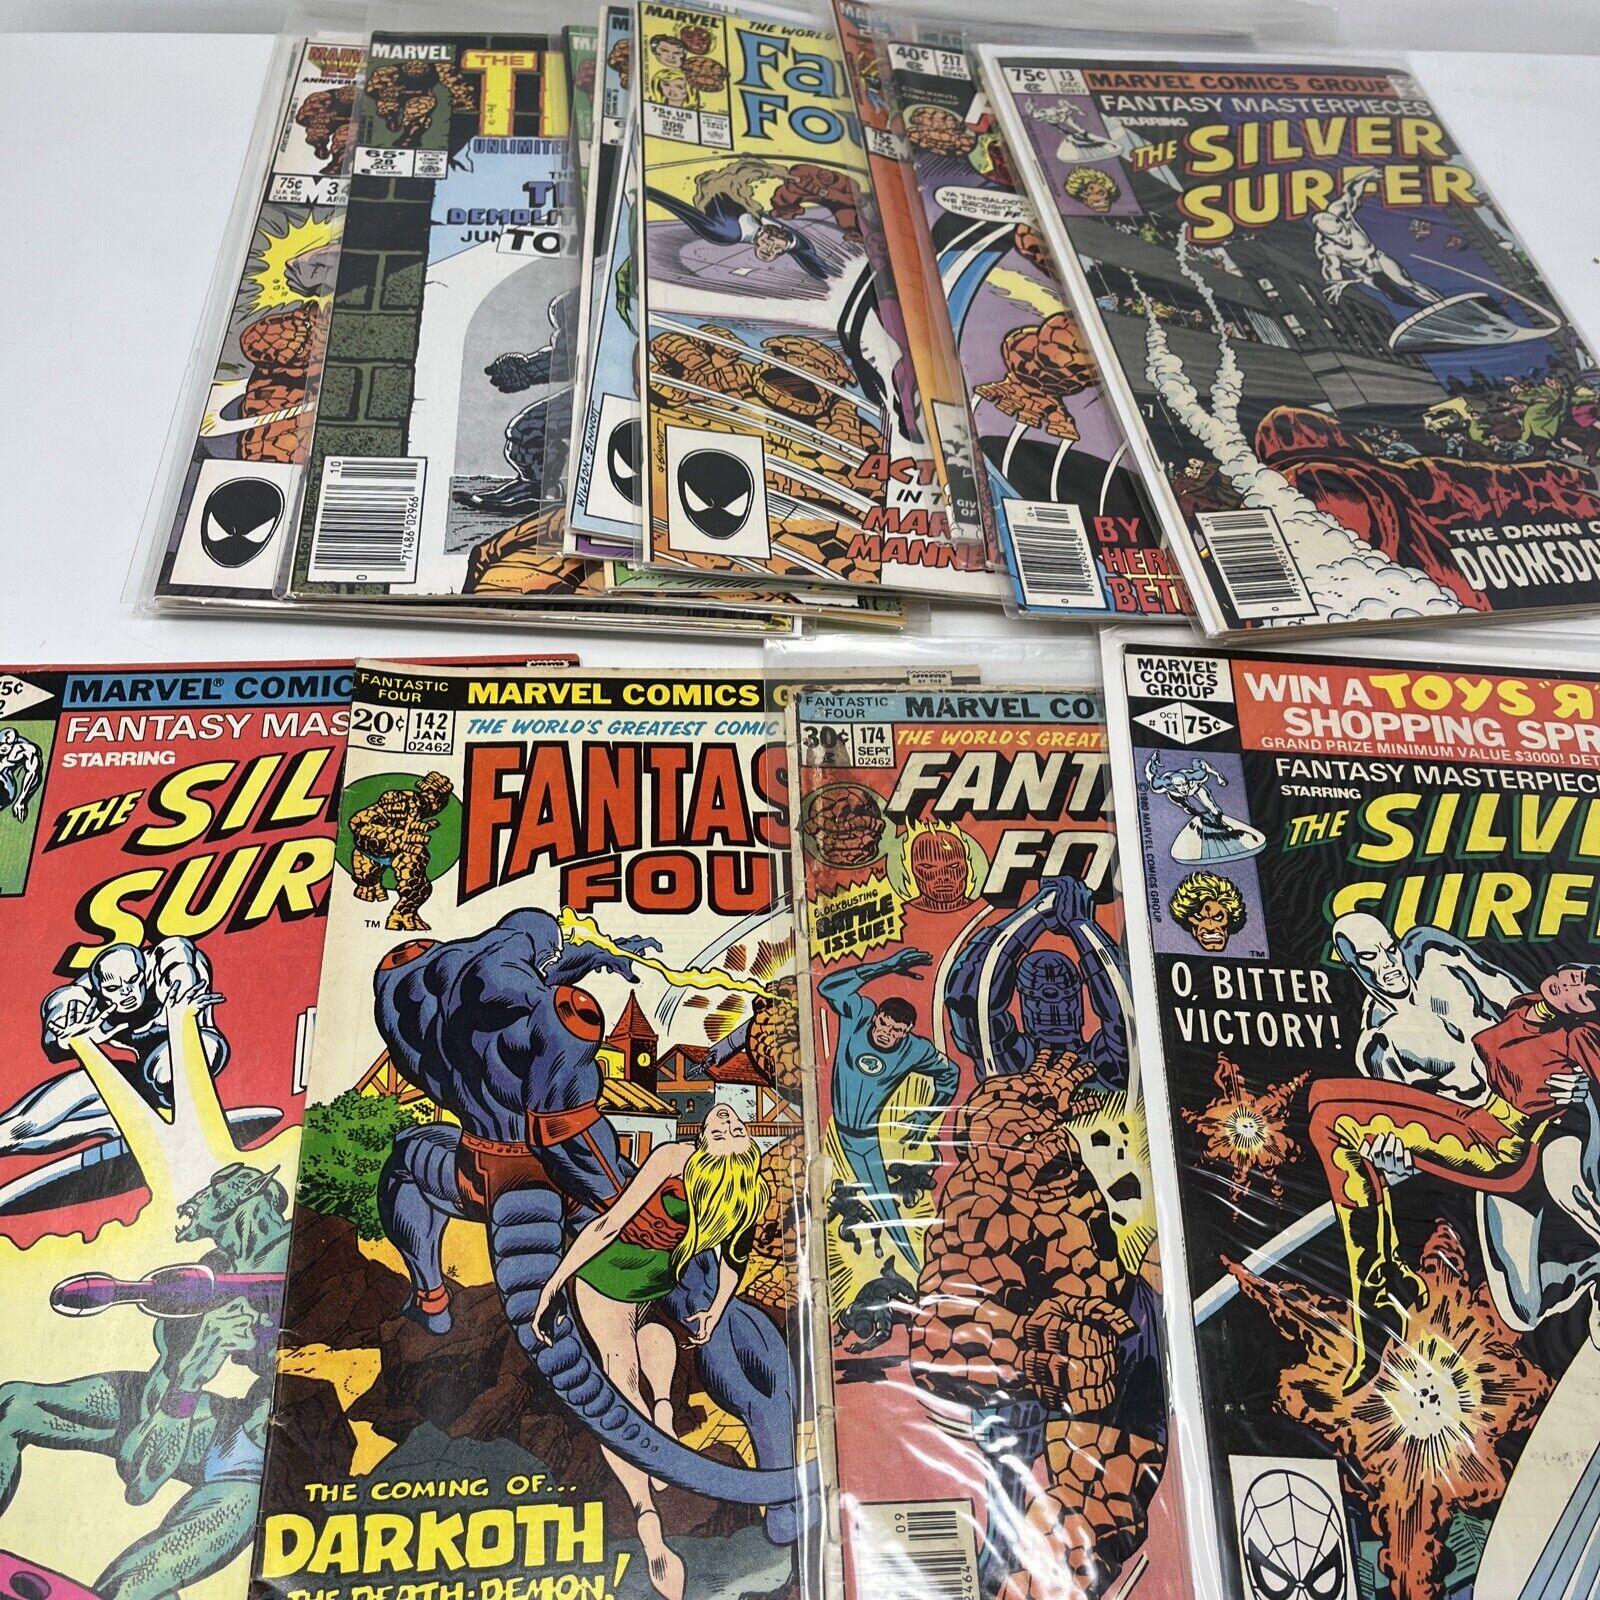 Lot 21 comics Fantastic Four 142, Fantasy Masterpieces 2 Marvel The Thing